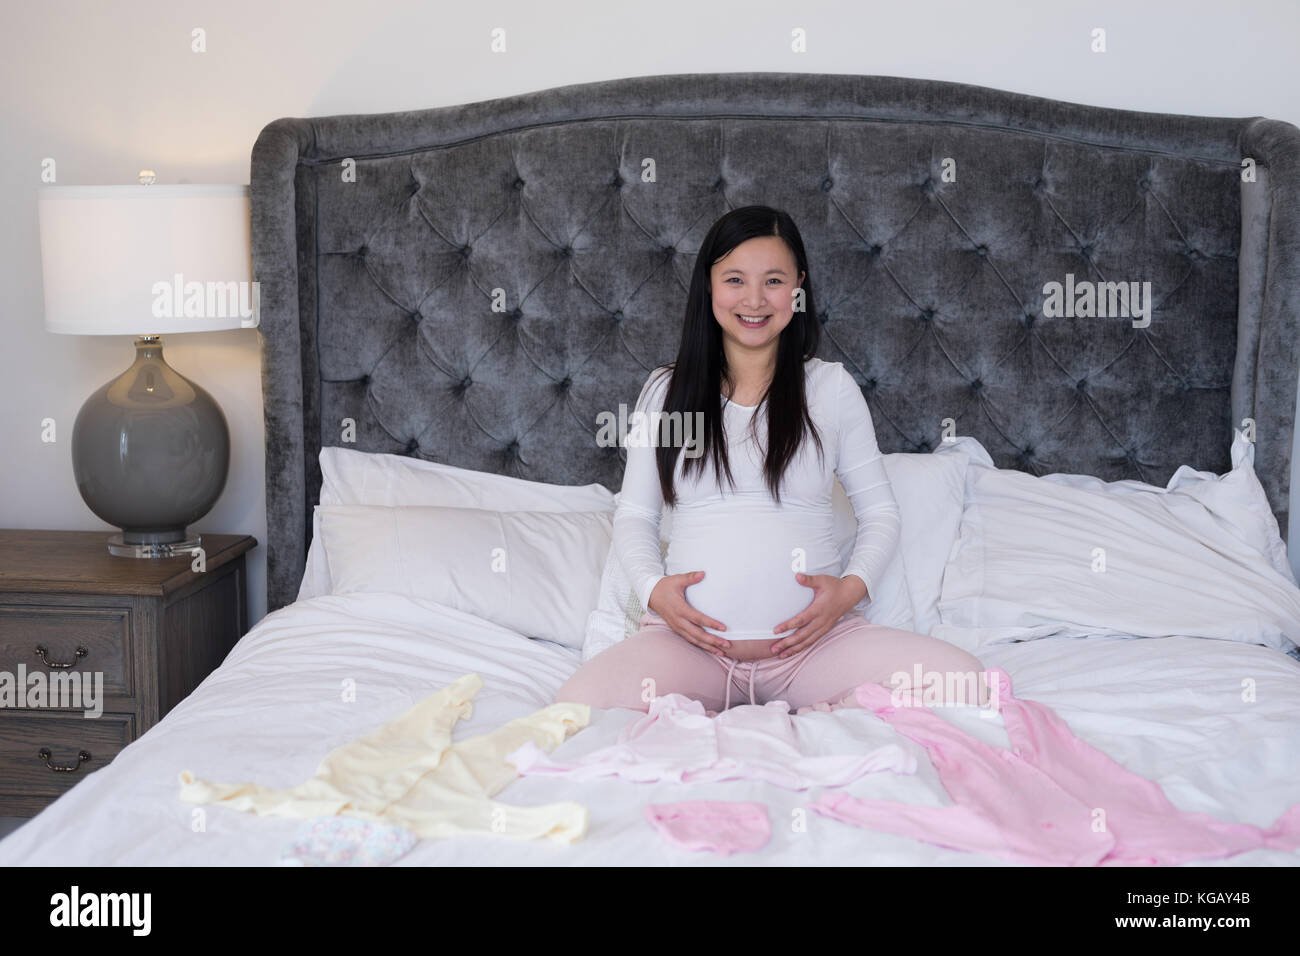 Portrait of woman feeling the presence of baby in stomach at home Stock Photo